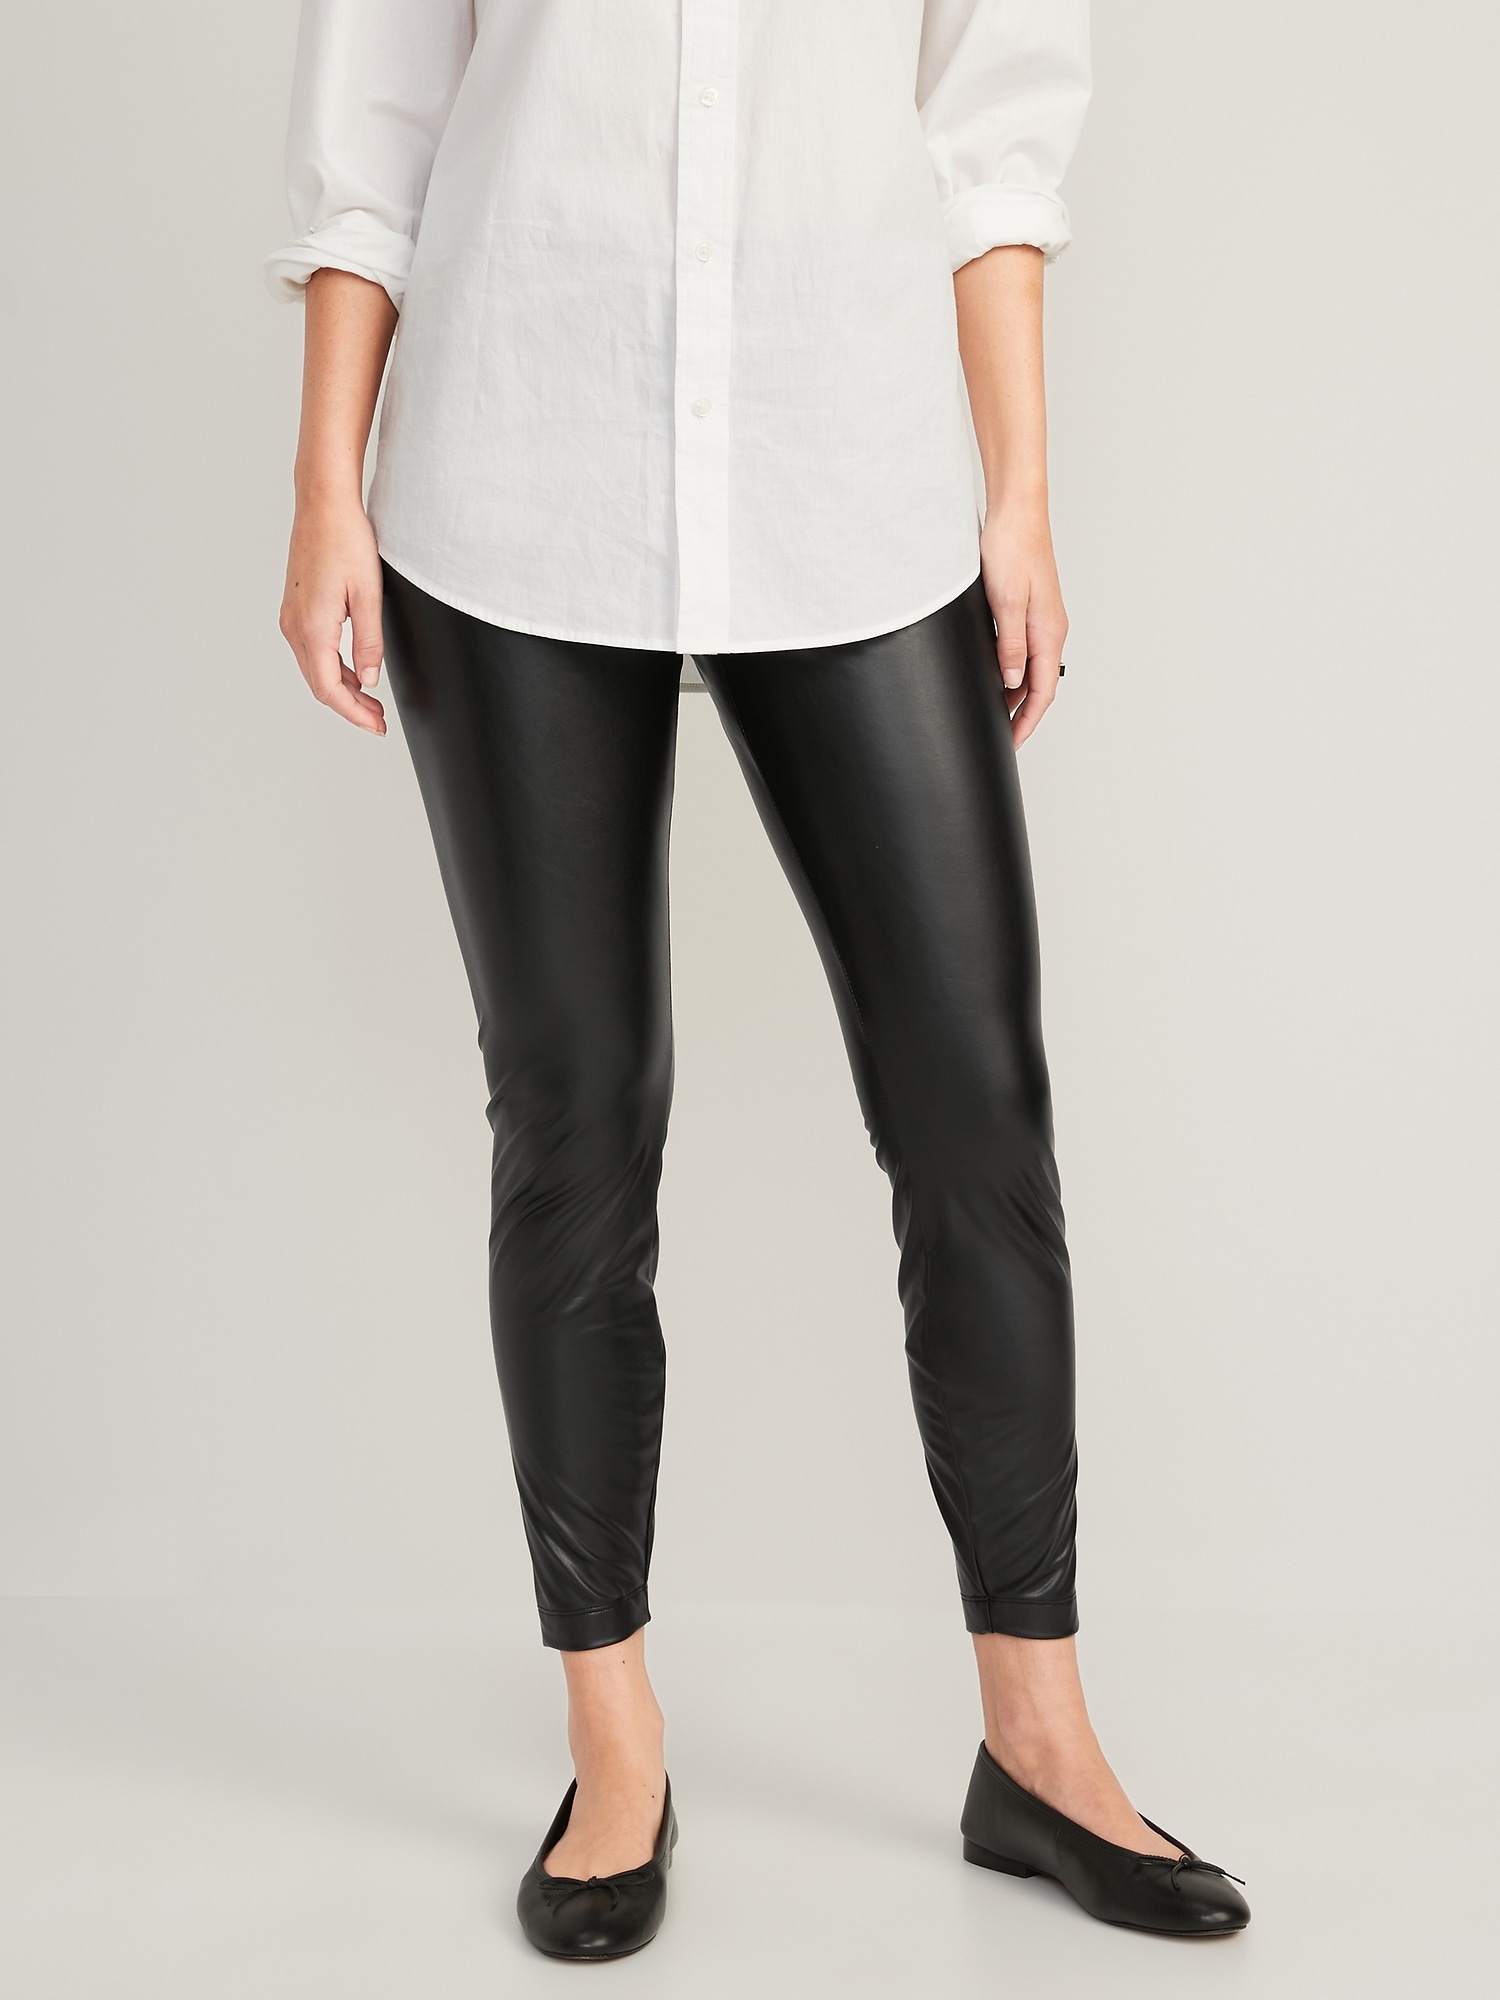 High-Waisted Faux-Leather Panel Leggings For Women, Old Navy